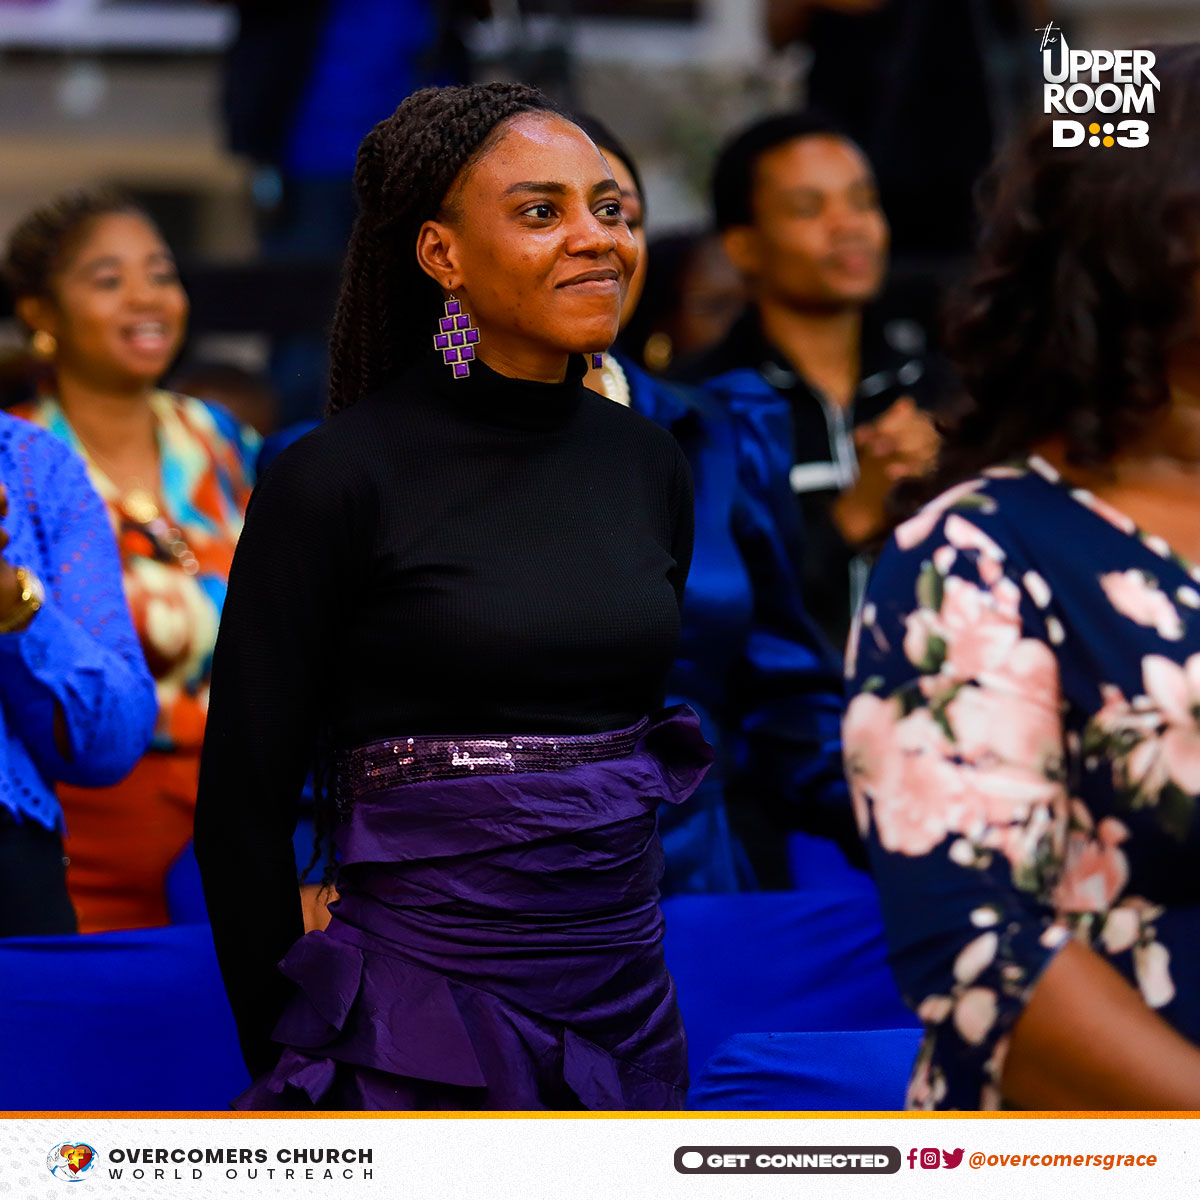 This #OvercomersSunday was EPIC!
The Spirit of the Lord God, the resurrection power of the LORD Jesus Christ, moved mightily in our midst and quickened us today.
We are forver changed. #TheUpperRoom experience is here to stay! AMEN!

#HSFC2023 #OvercomersChurch